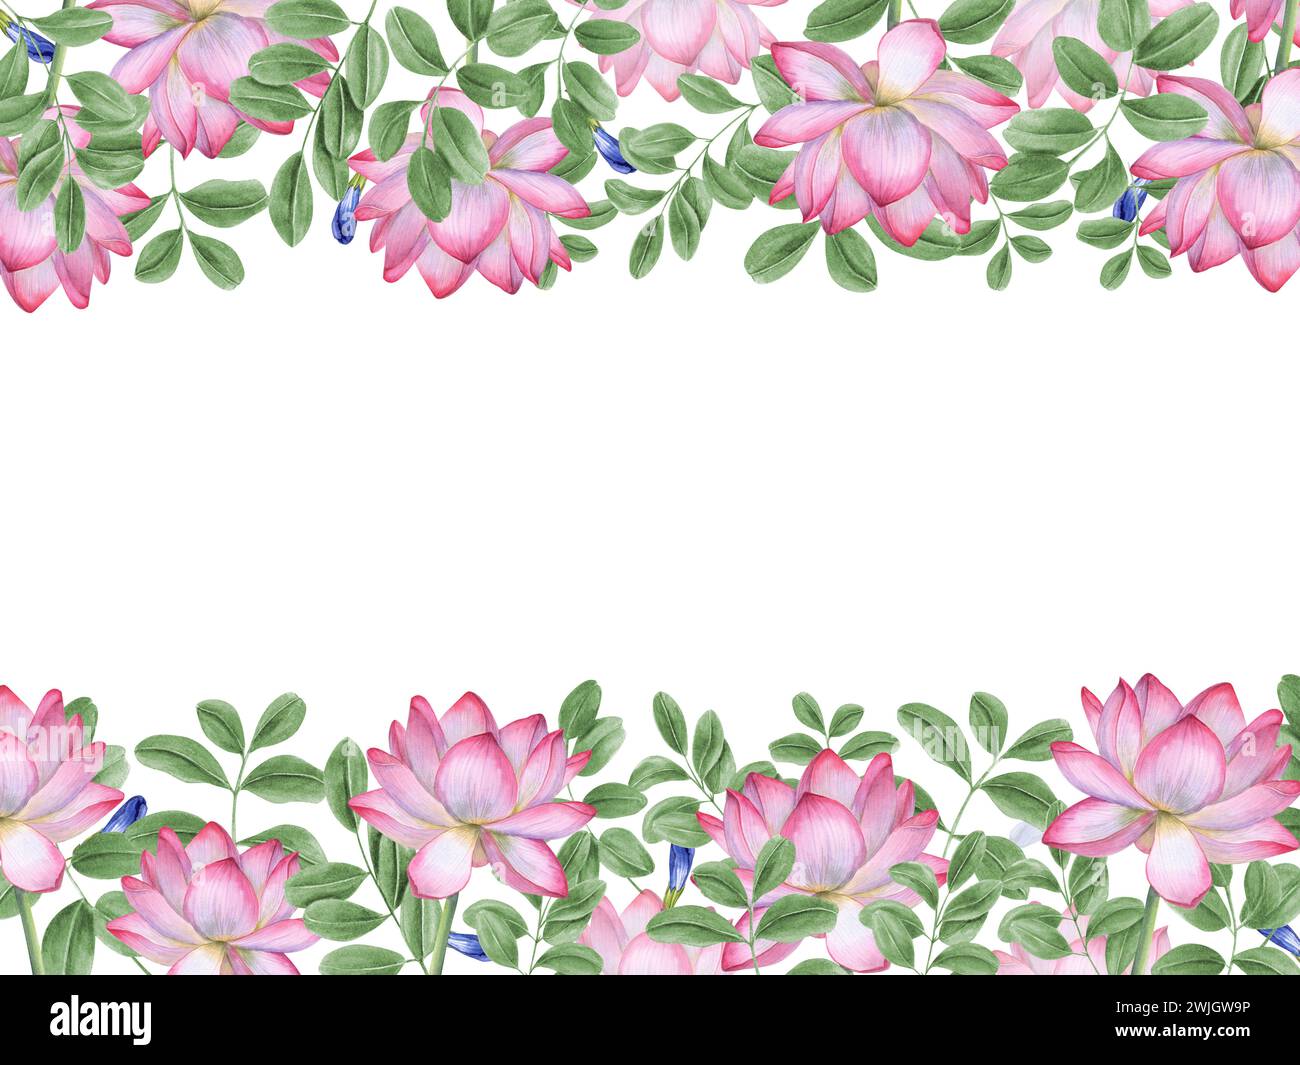 Horizontal frame pink white lotus, green leaves. Blooming Water Lily, wisteria leaf. Indian lotus, anchan leaf, sacred lotus. Watercolor illustration. Stock Photo